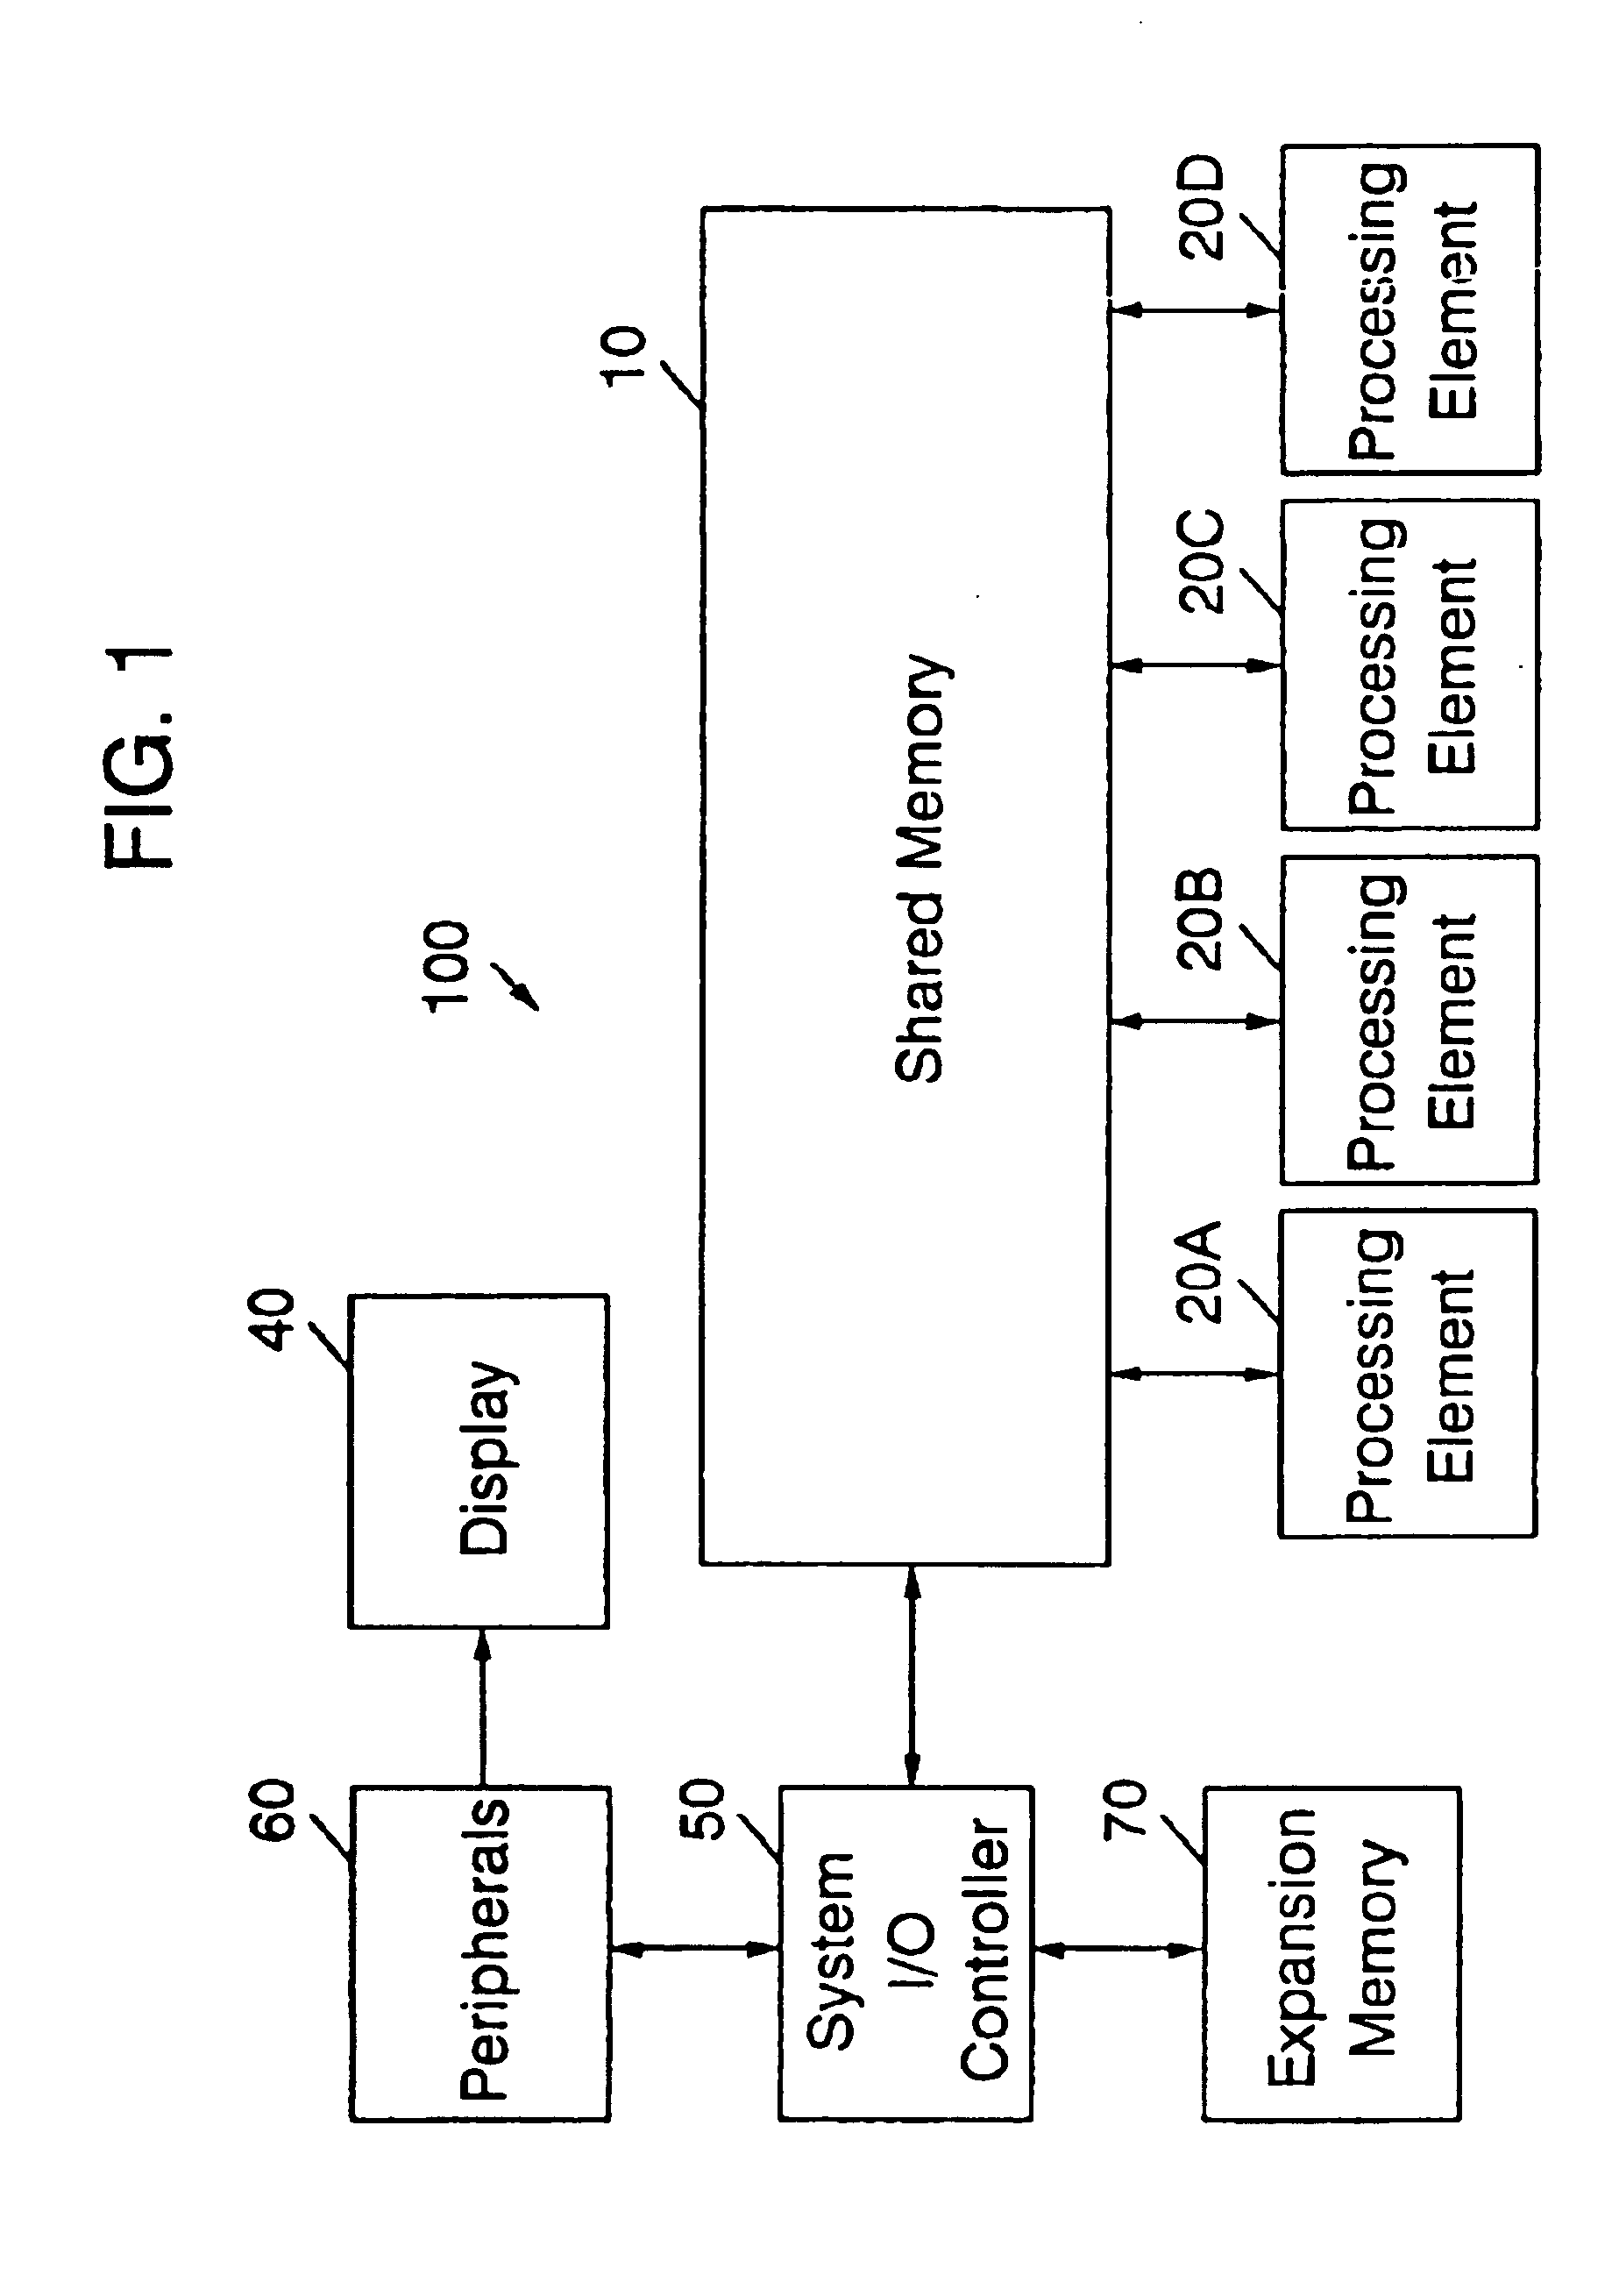 Symmetric multi-processing system utilizing a DMAC to allow address translation for attached processors